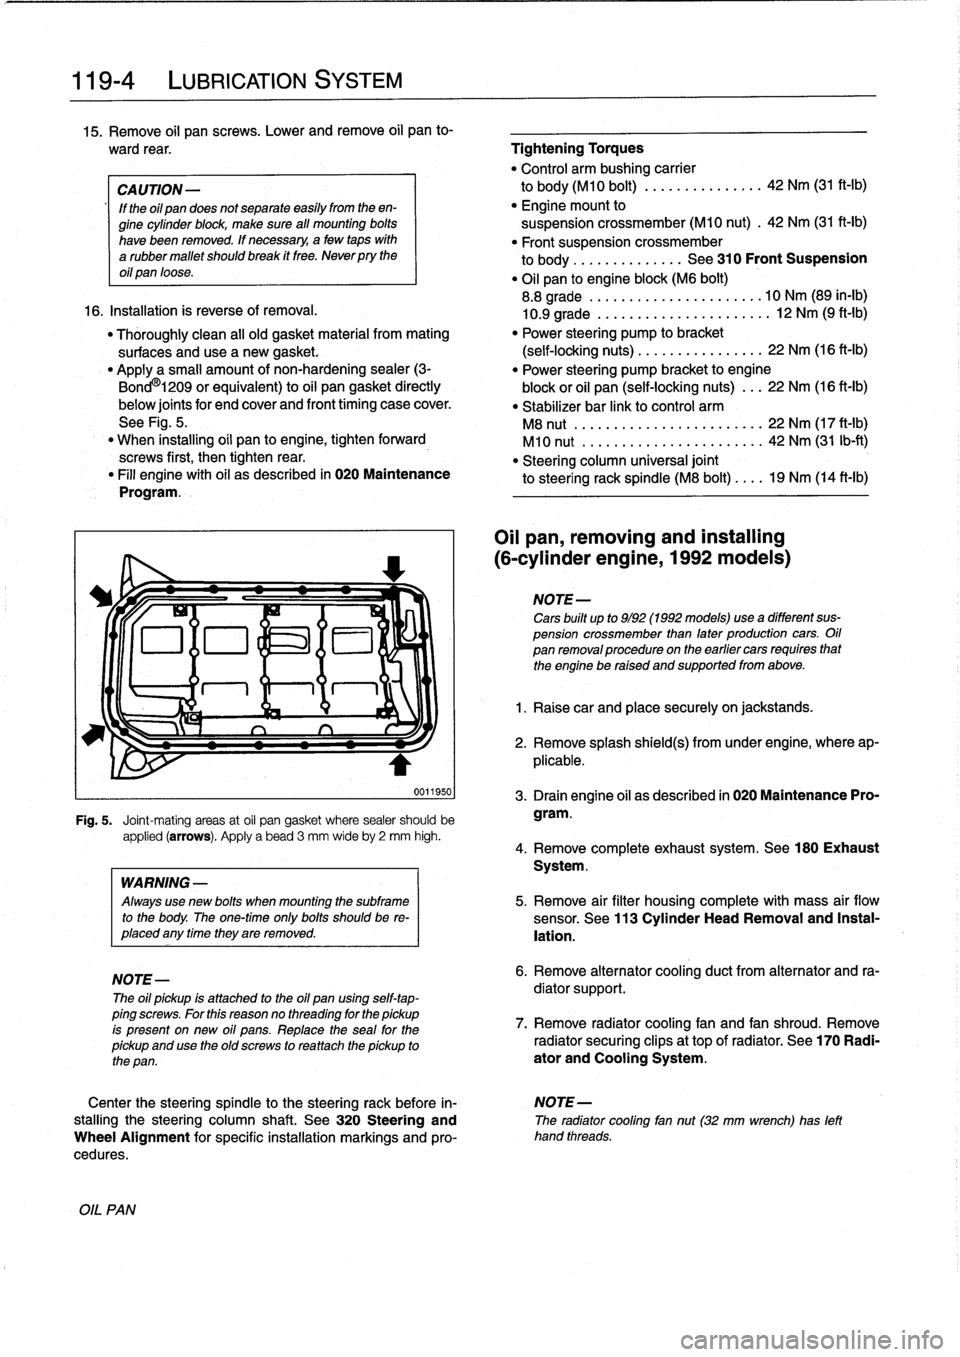 BMW 325i 1998 E36 Workshop Manual 
119-
4

	

LUBRICATION
SYSTEM

15
.
Remove
oil
pan
screws
.
Lower
andremove
oil
pan
to-

ward
rear
.

	

Tightening
Torques

"
Control
arm
bushing
carrier

CAUTION-

	

to
body(M10
bolt)
............